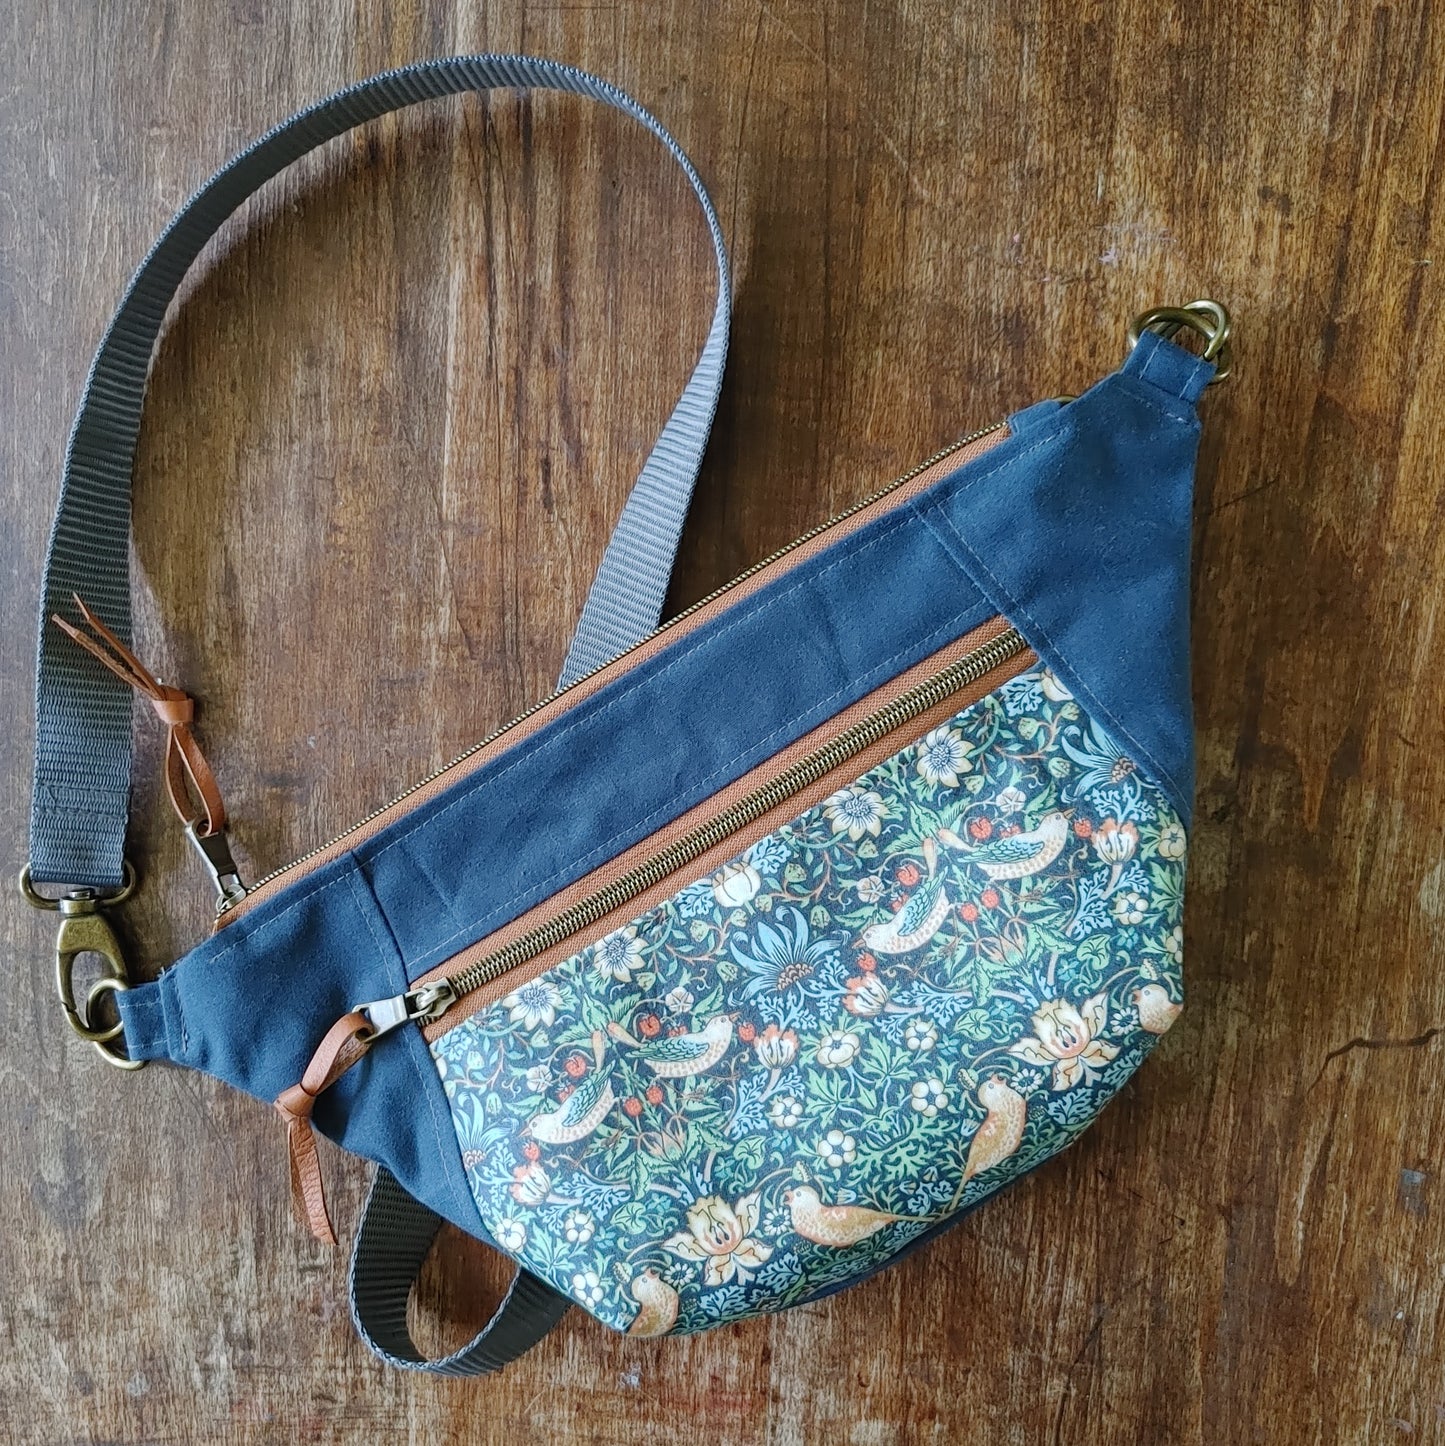 Belt Bag / Hip Pack Large Capacity in Waxed Canvas and Print